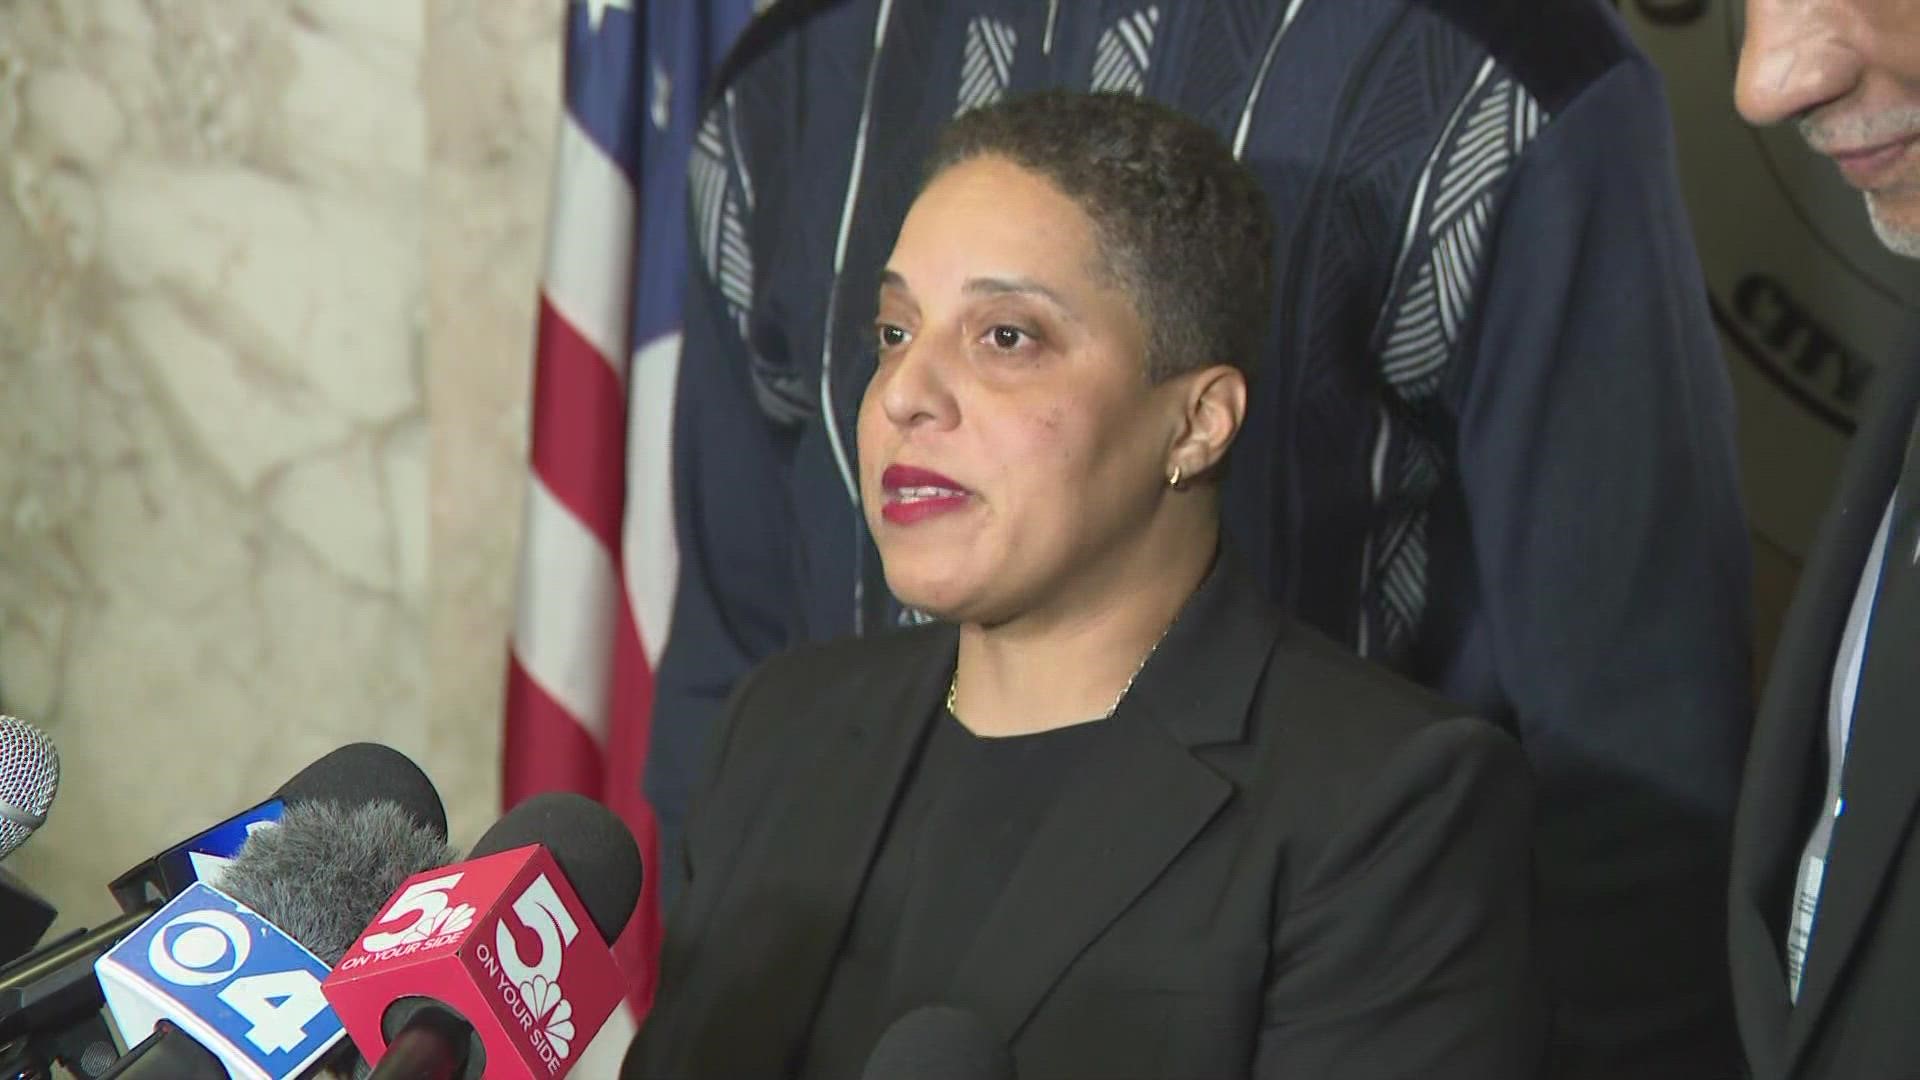 Attorney General Andrew Bailey announced legal action to remove Kim Gardner from office after she didn't respond to his demand that she resign by noon Thursday.